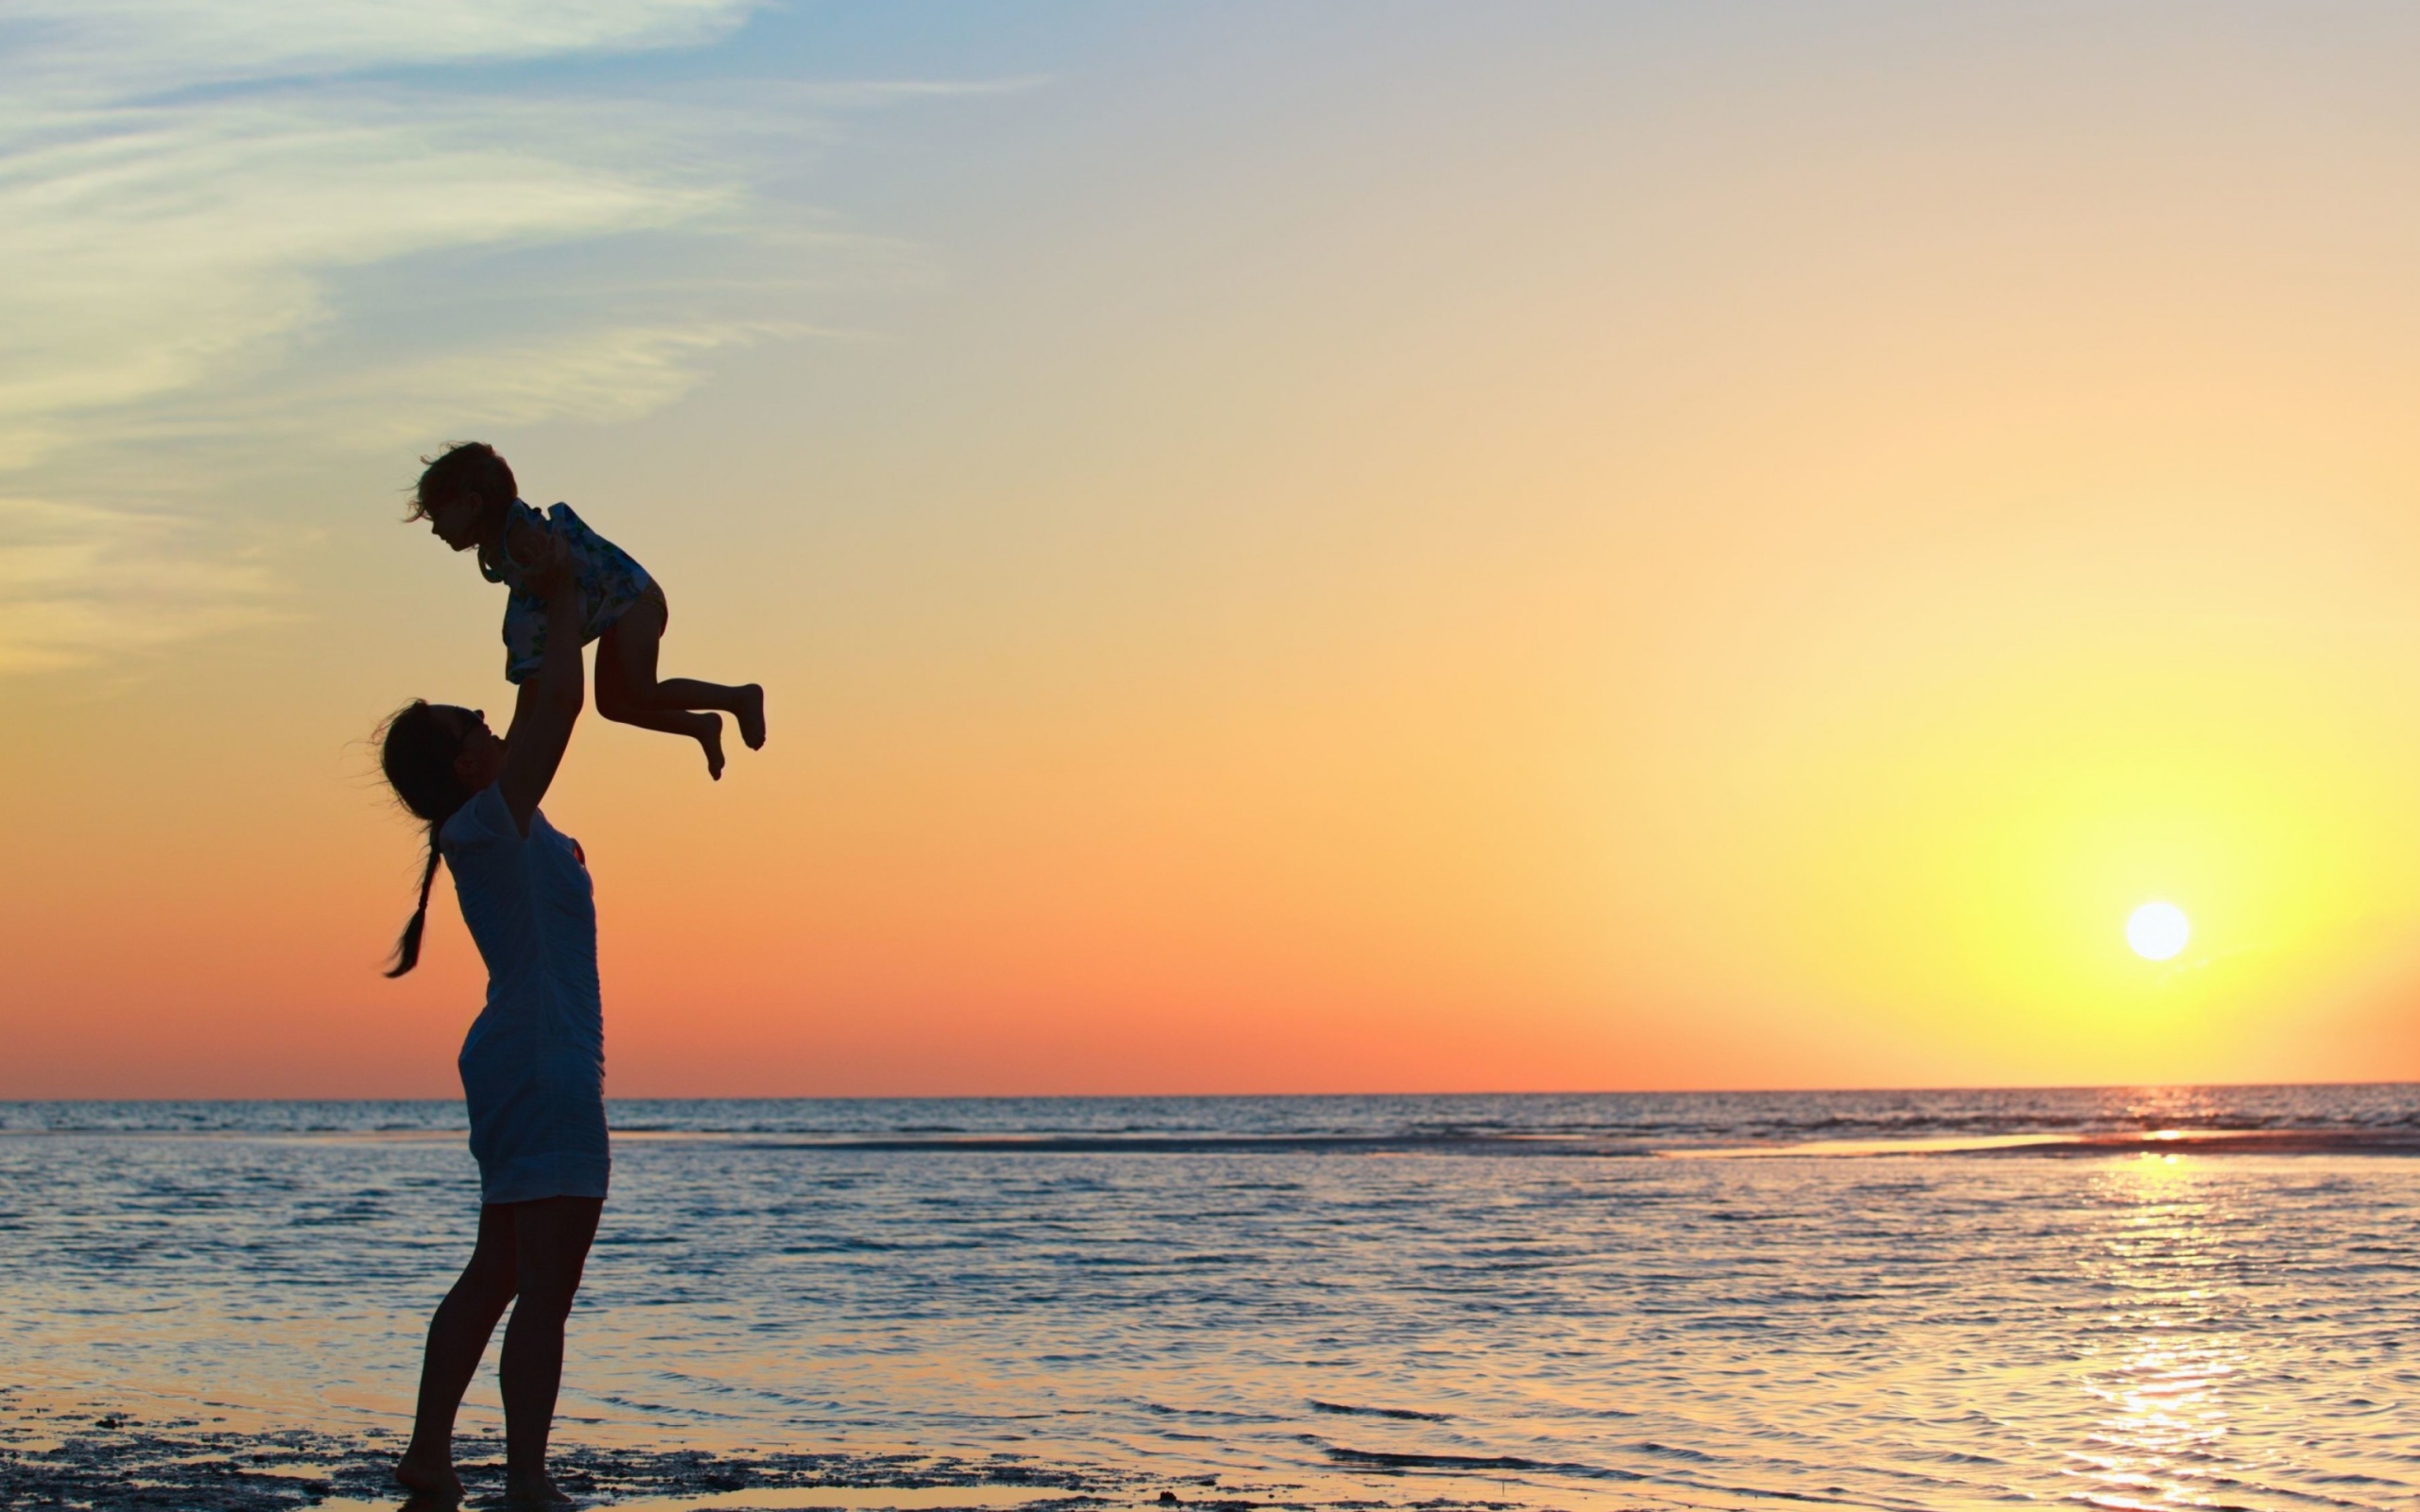 Das Mother And Child On Beach Wallpaper 2560x1600